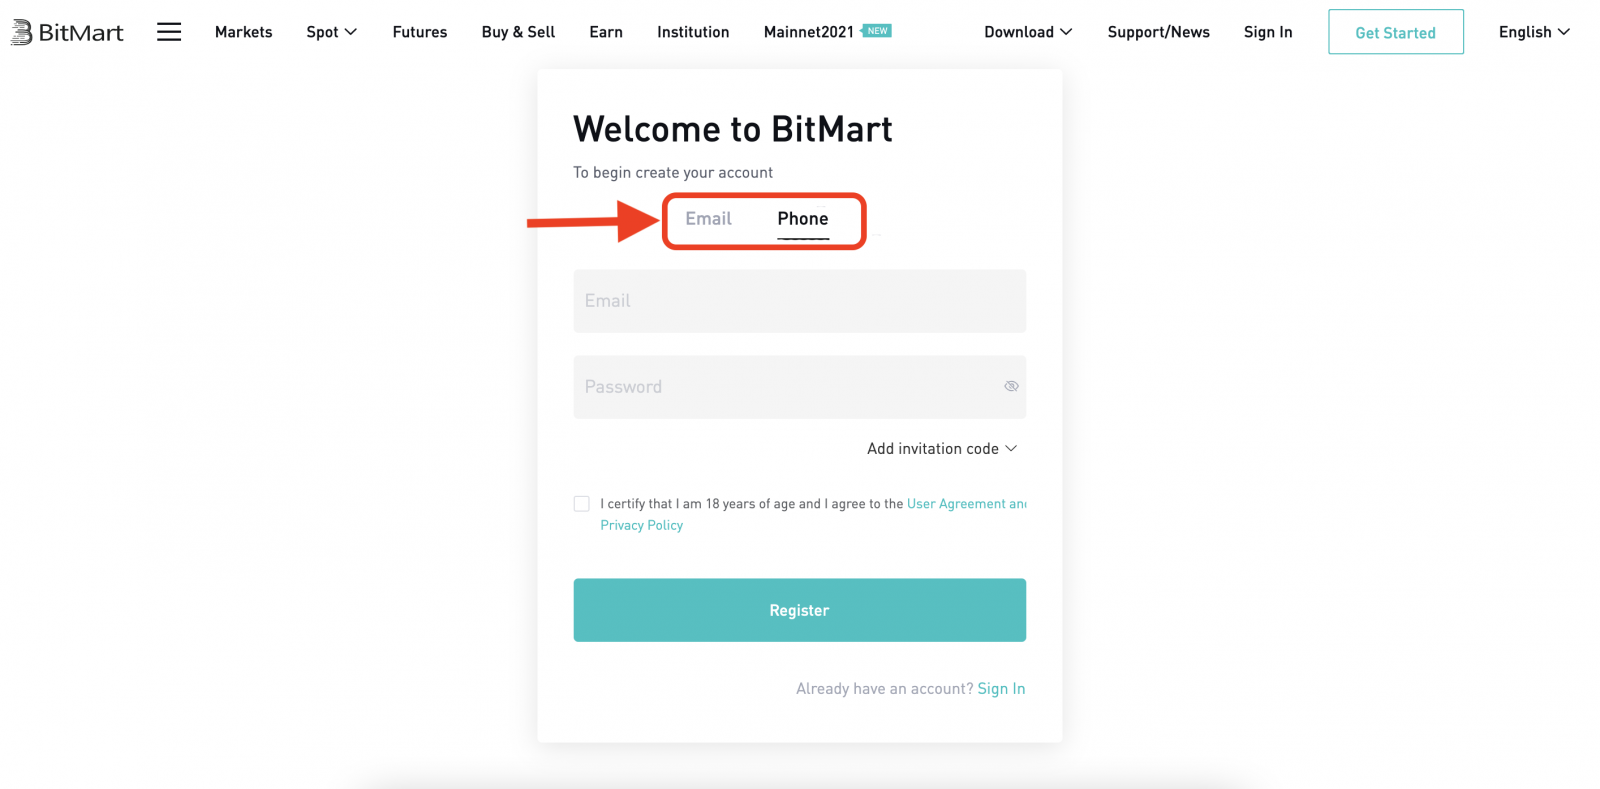 How to Open a Trading Account in BitMart